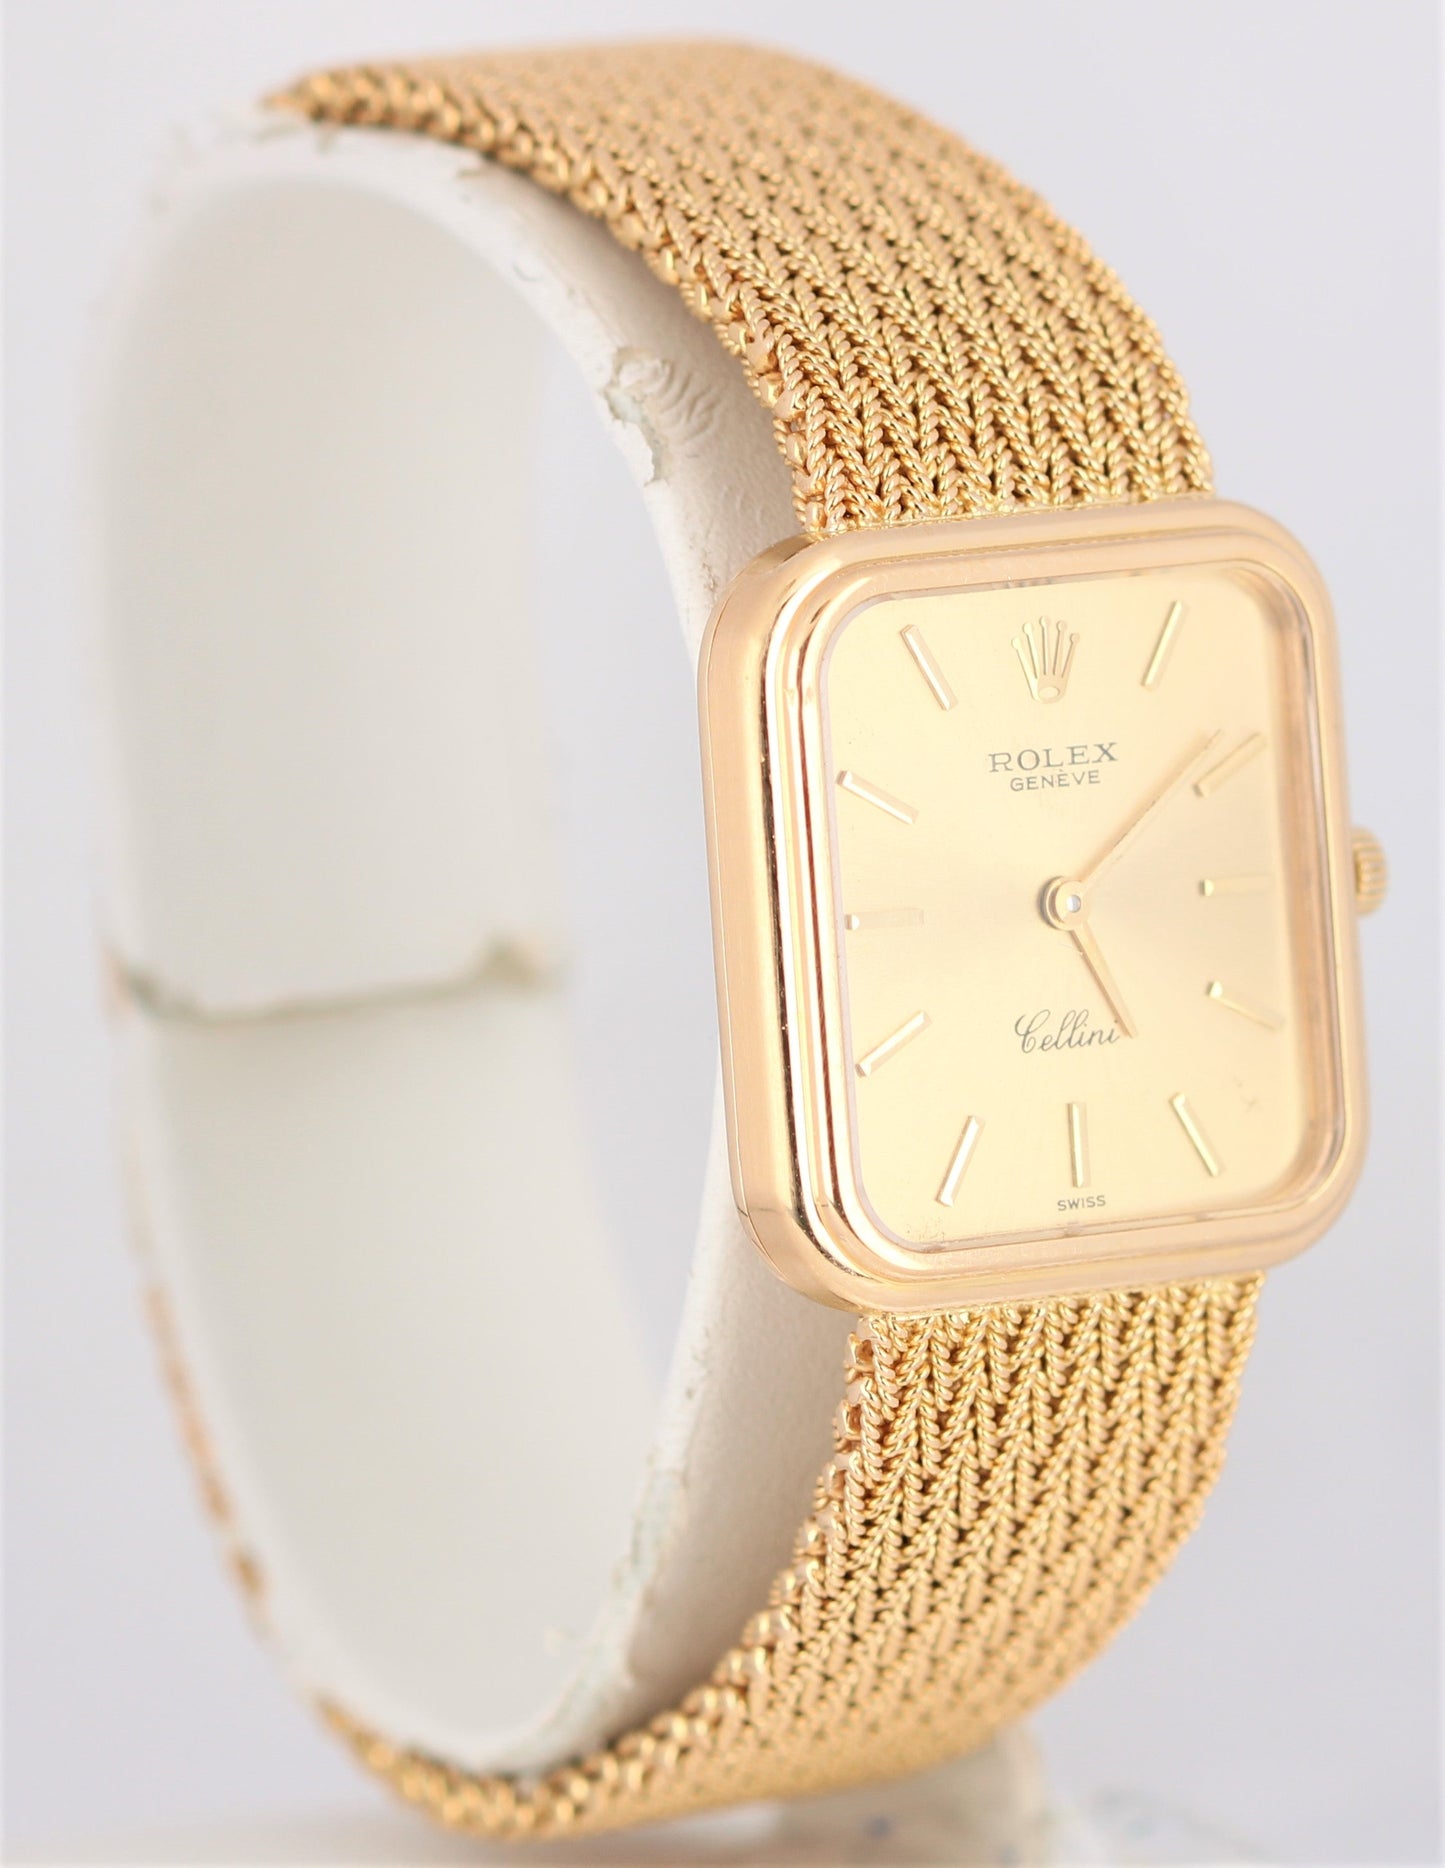 Vintage Rolex Cellini 18k Yellow Gold Champagne Dial 23mm 4327 Watch